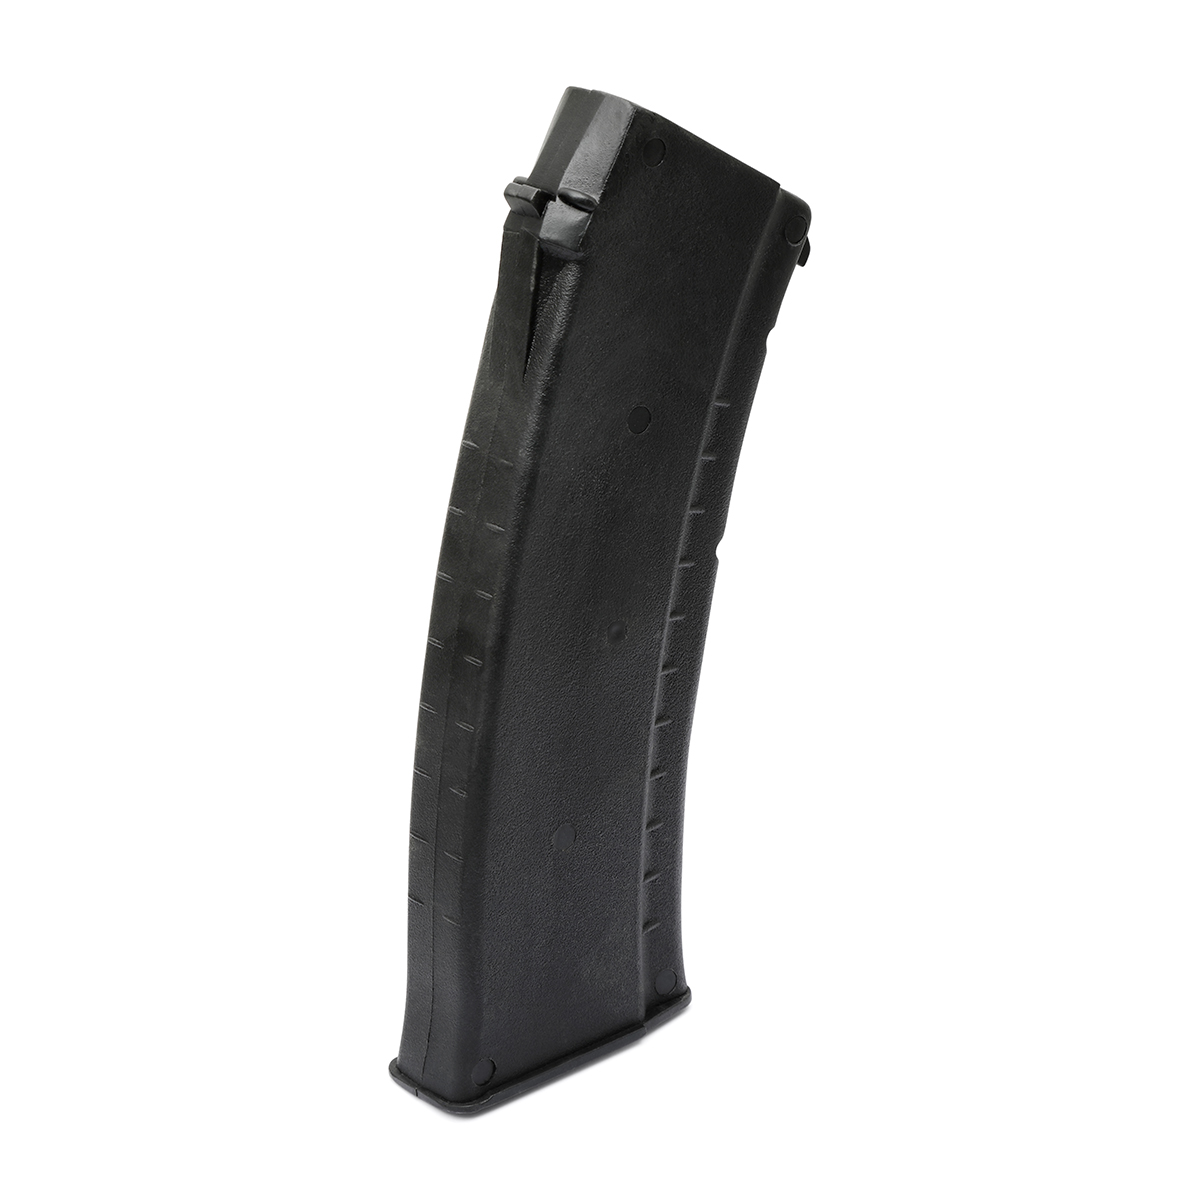 Ak-47 Rubber Magazine Only - Click Image to Close